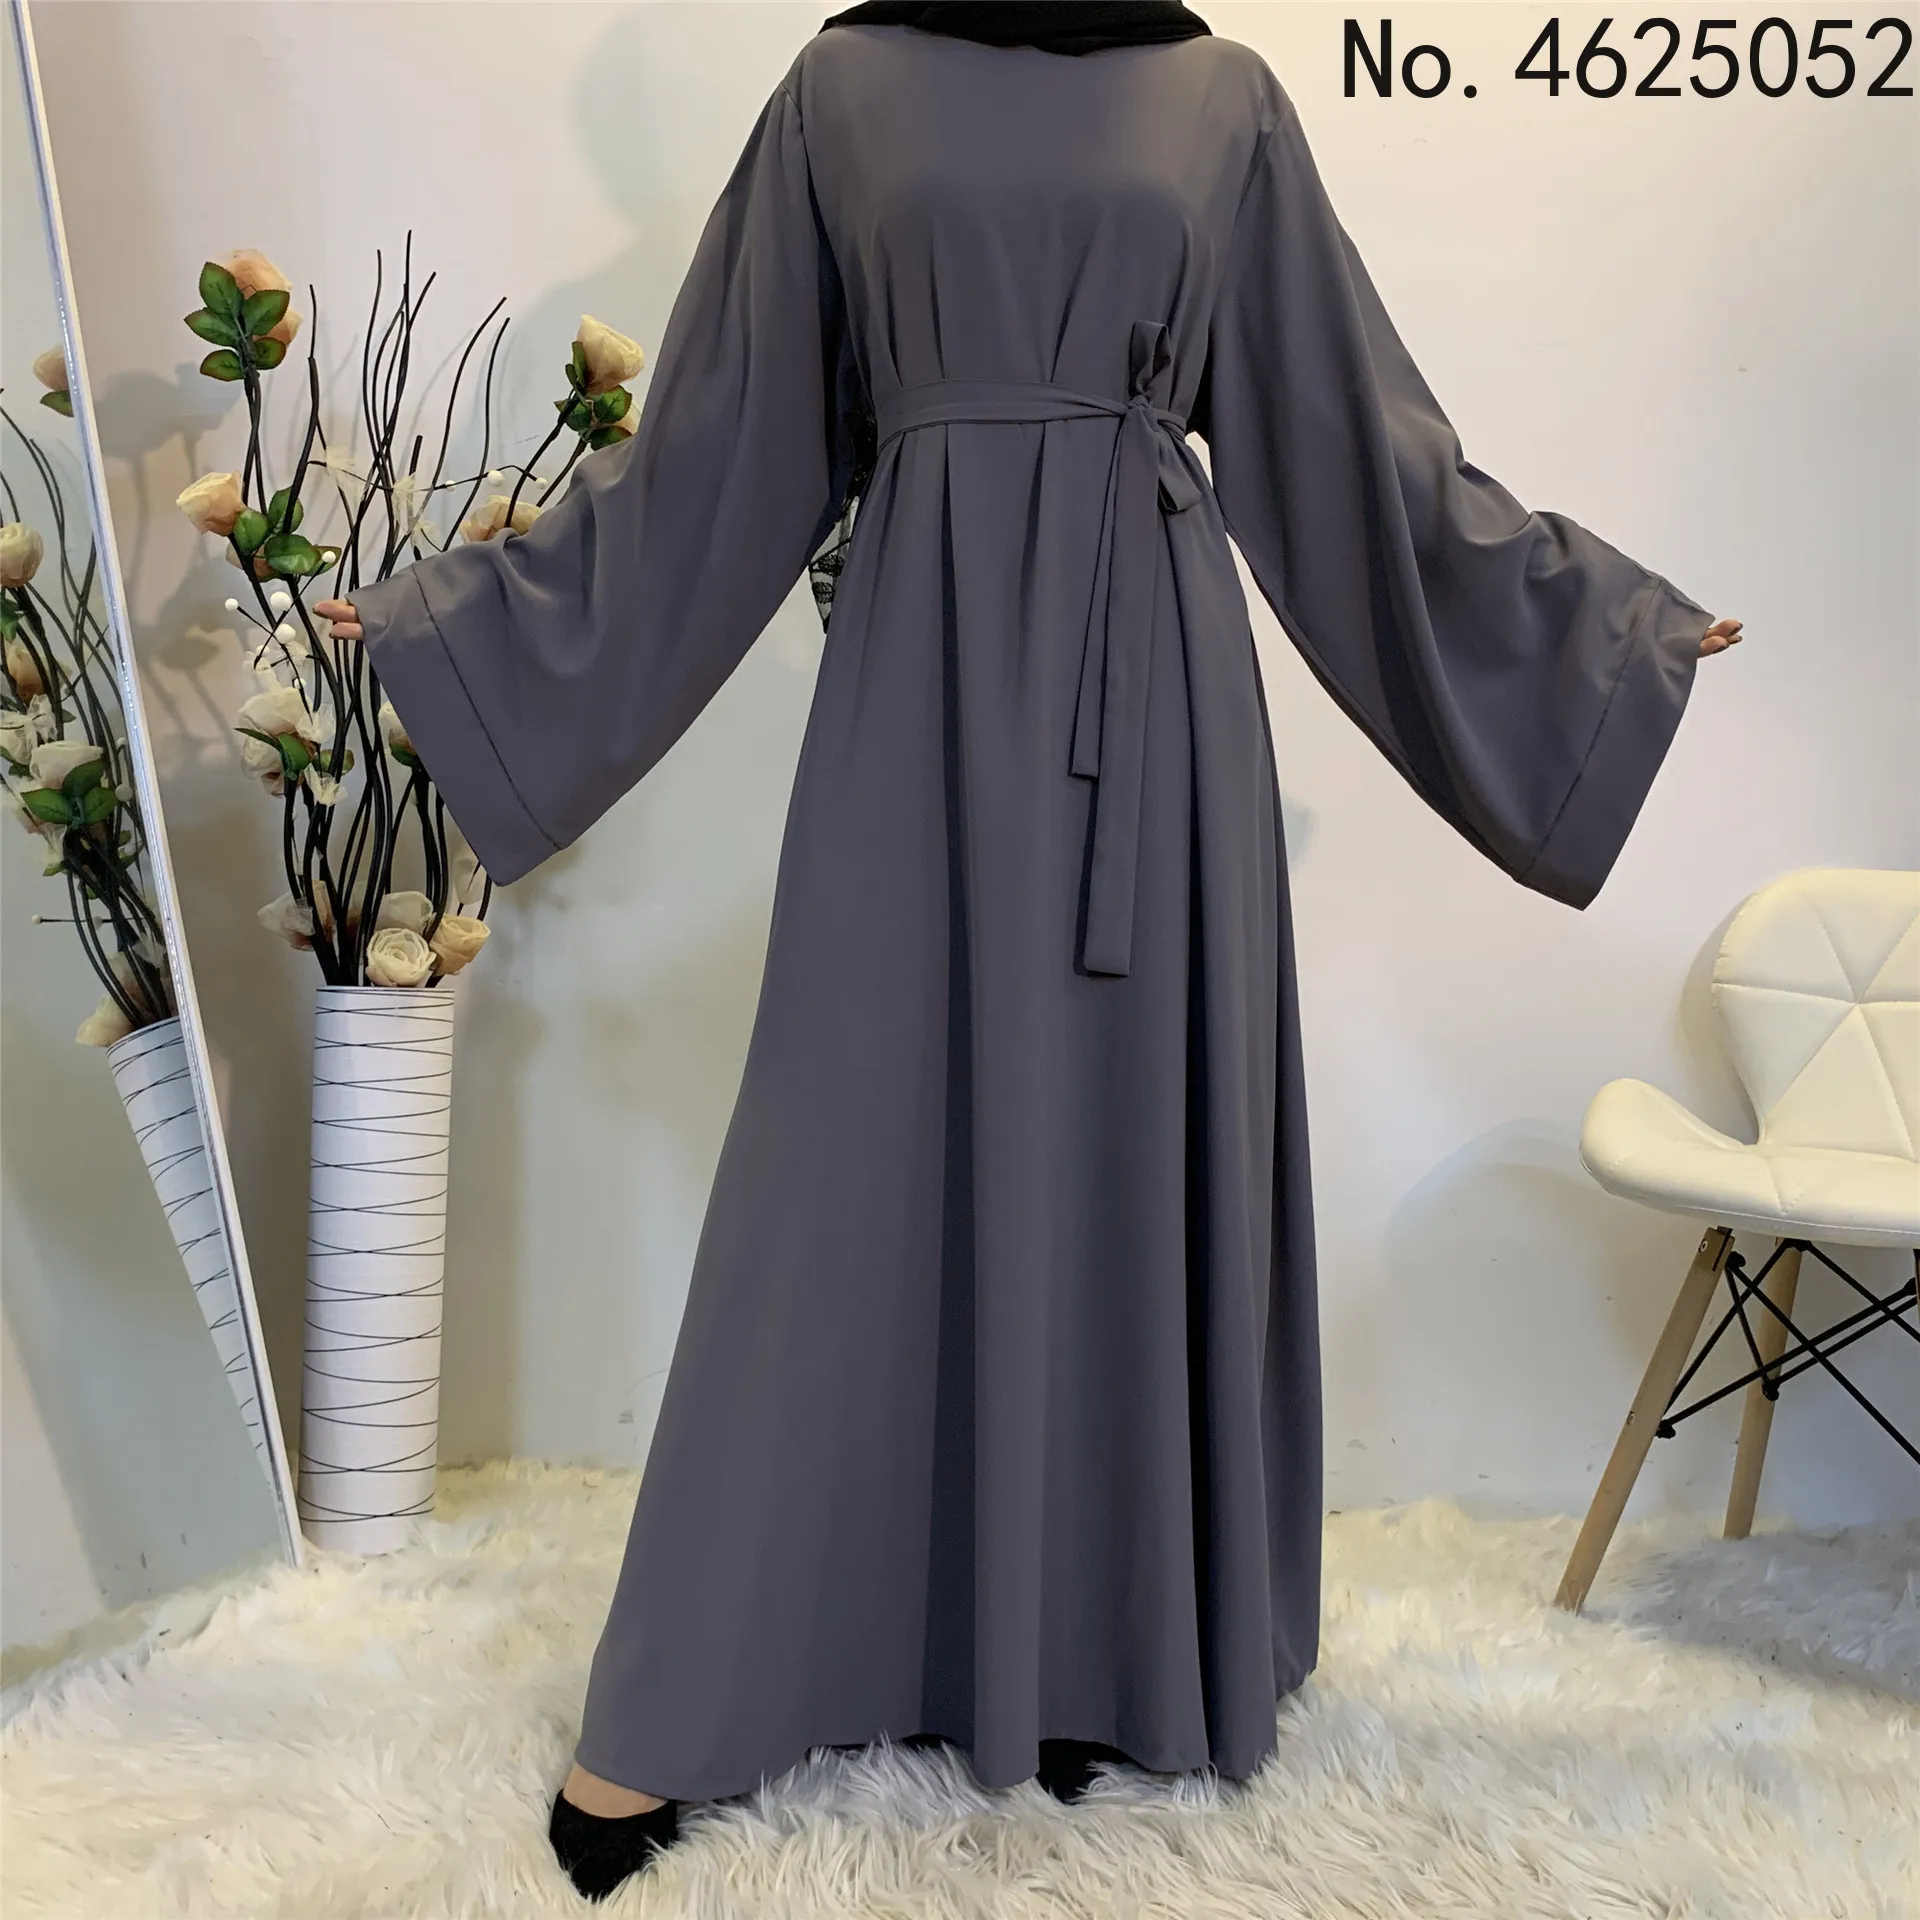 Muslim Fashion Hijab Long Dresses Women With Sashes Solid Color Islam Clothing Abaya African Dresses For Women Musulman Robes